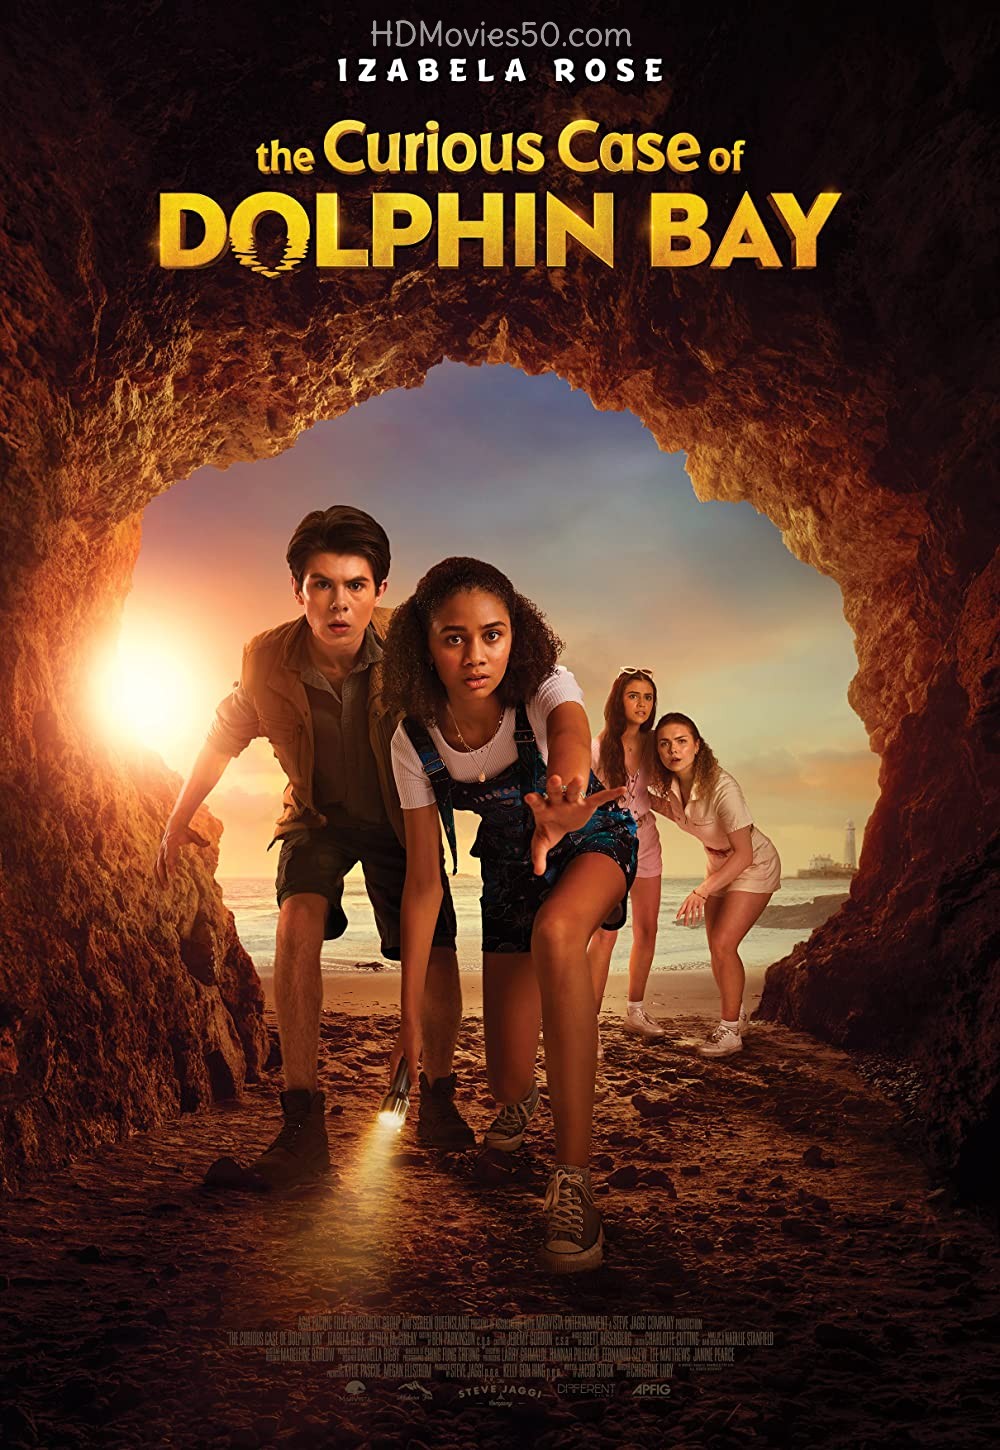 The Curious Case of Dolphin Bay 2022 English 480p HDRip 350MB Download